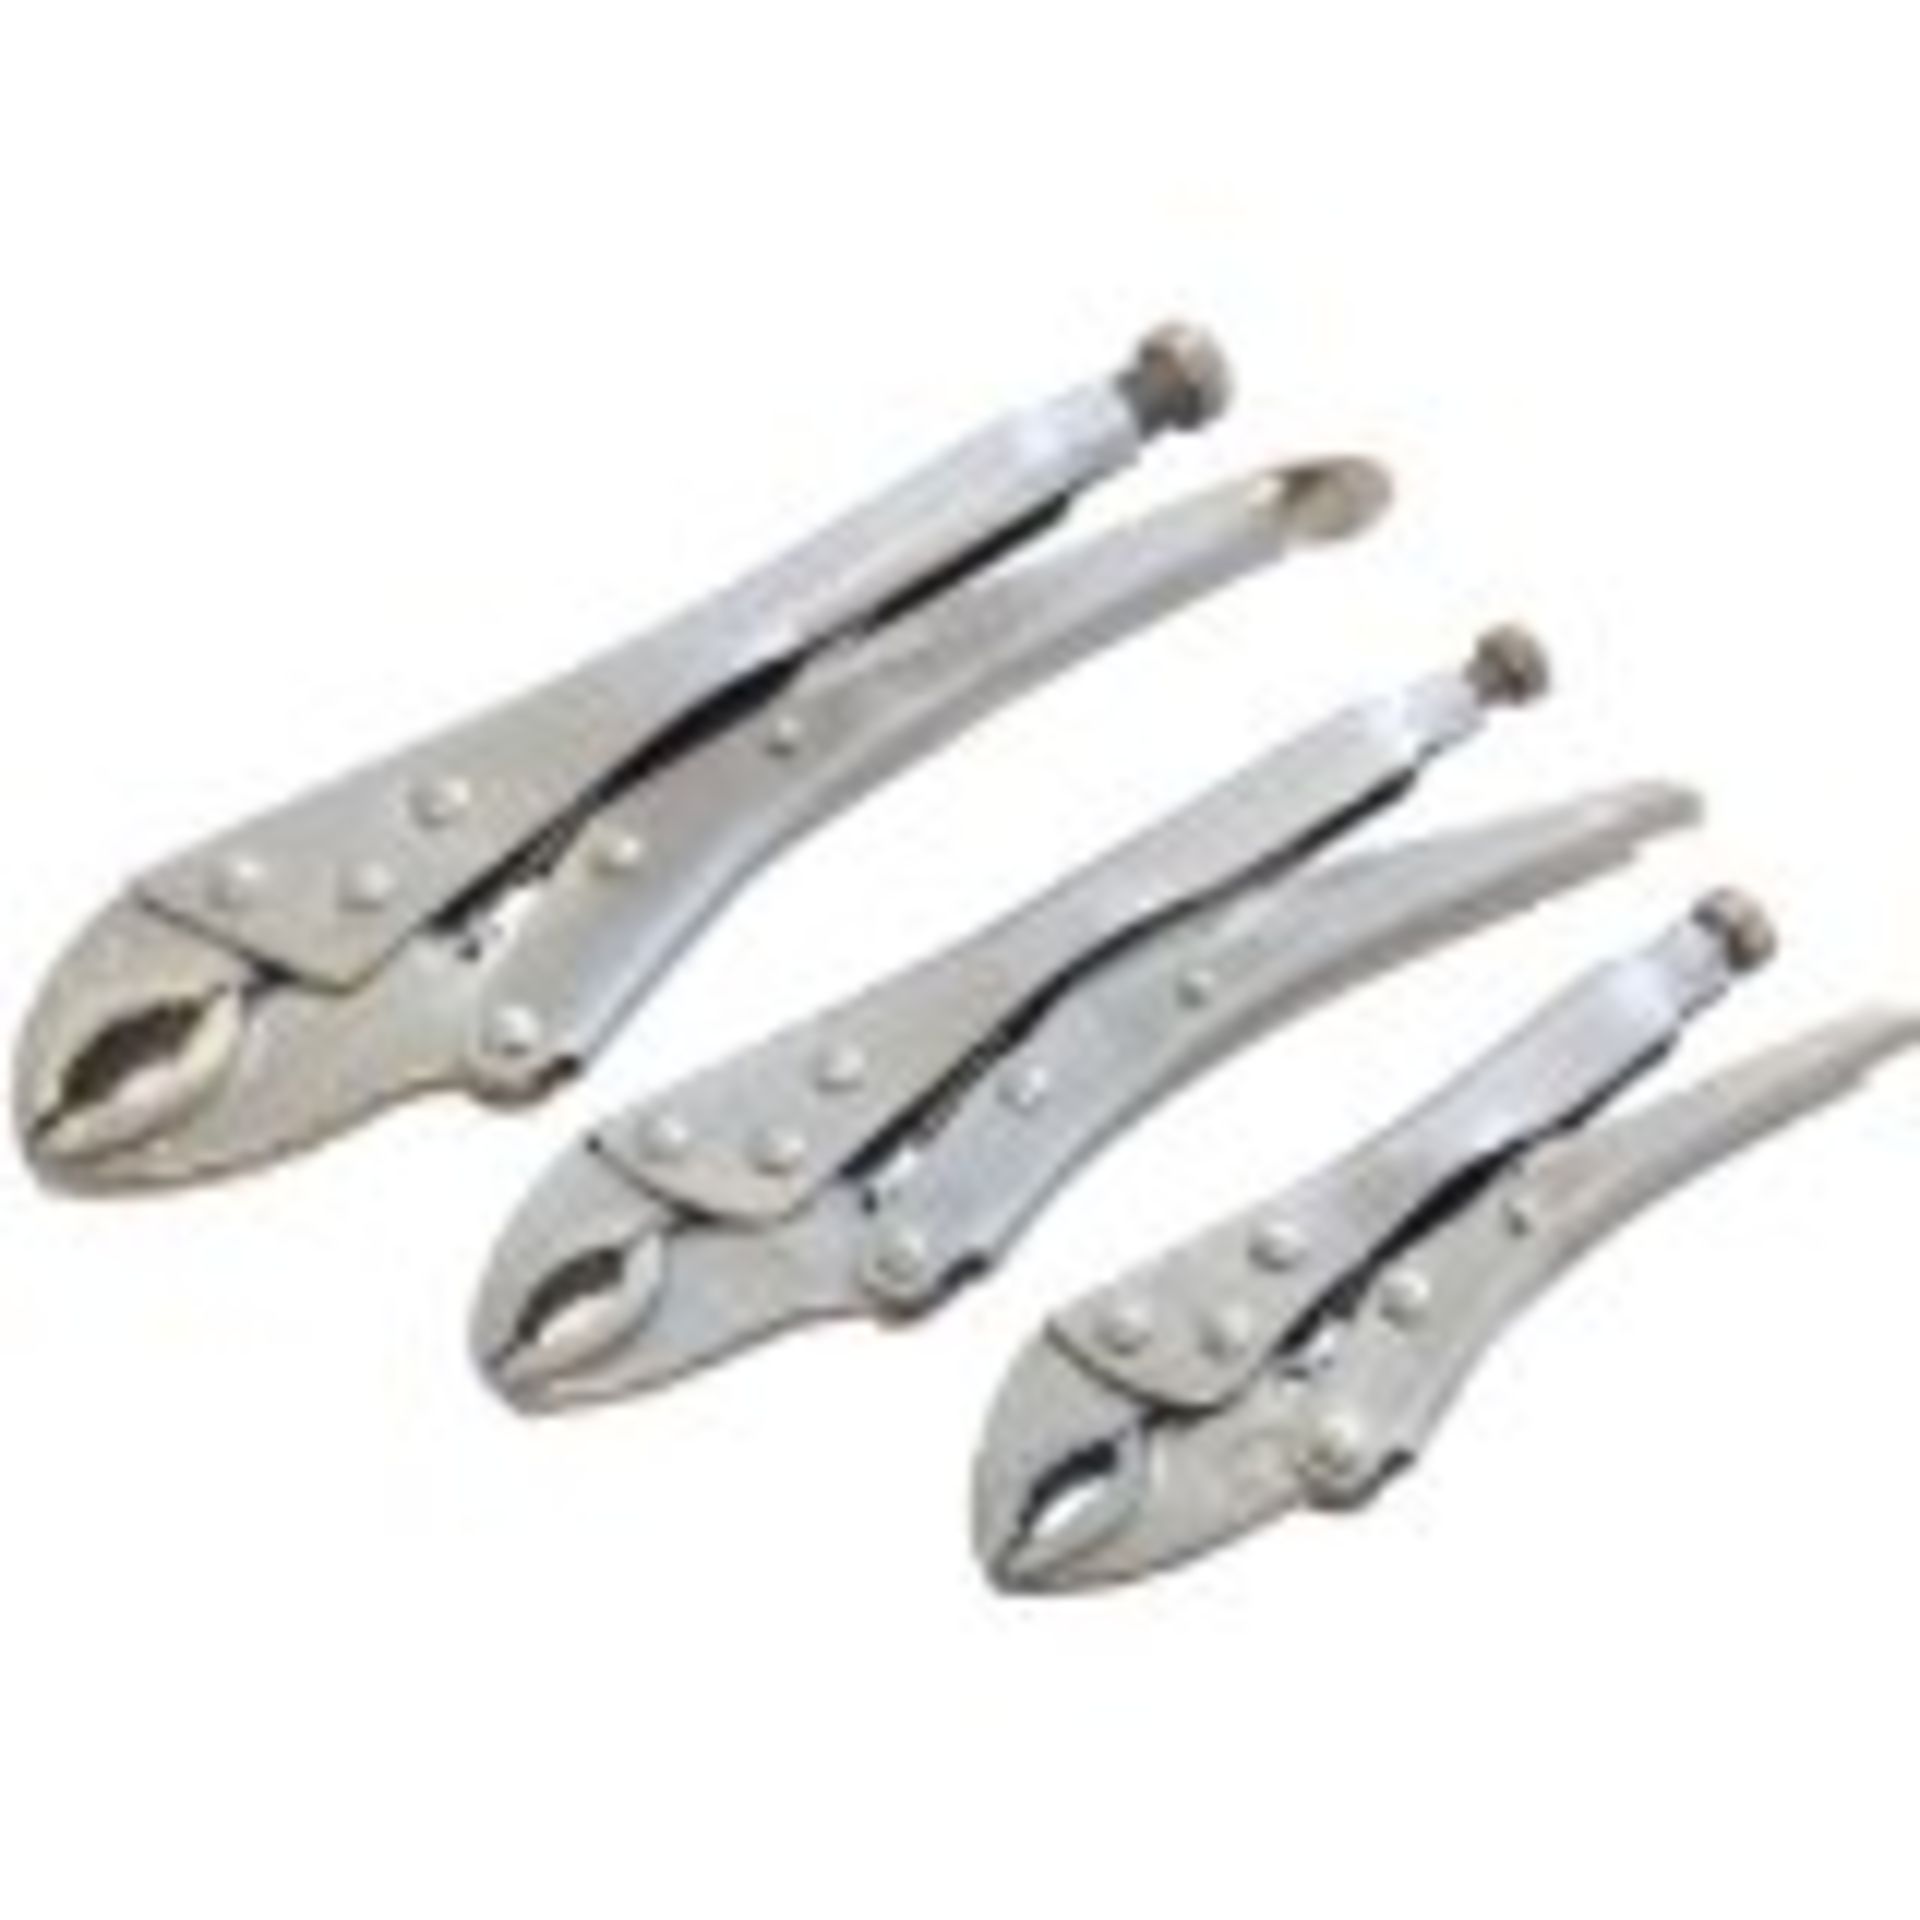 V *TRADE QTY* Brand New Three Piece Locking Plier Set X 4 YOUR BID PRICE TO BE MULTIPLIED BY FOUR